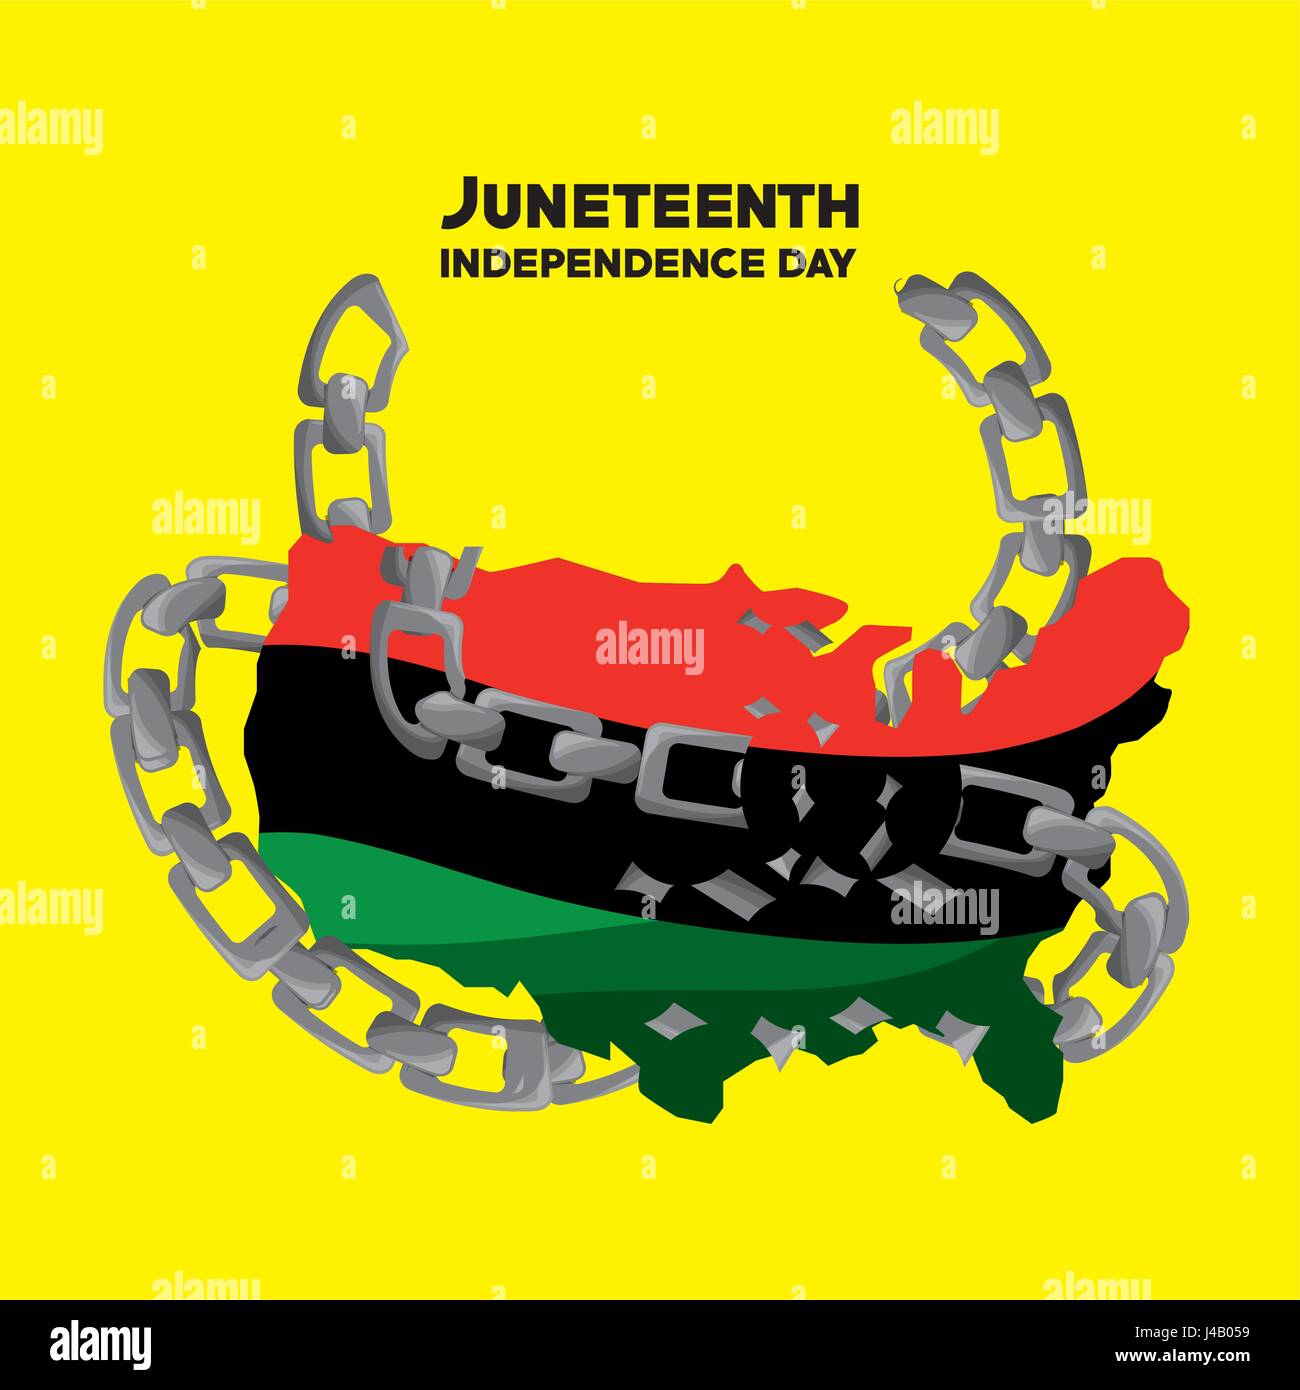 Independence Day Flag With Chain To Juneteenth Stock Vector Image